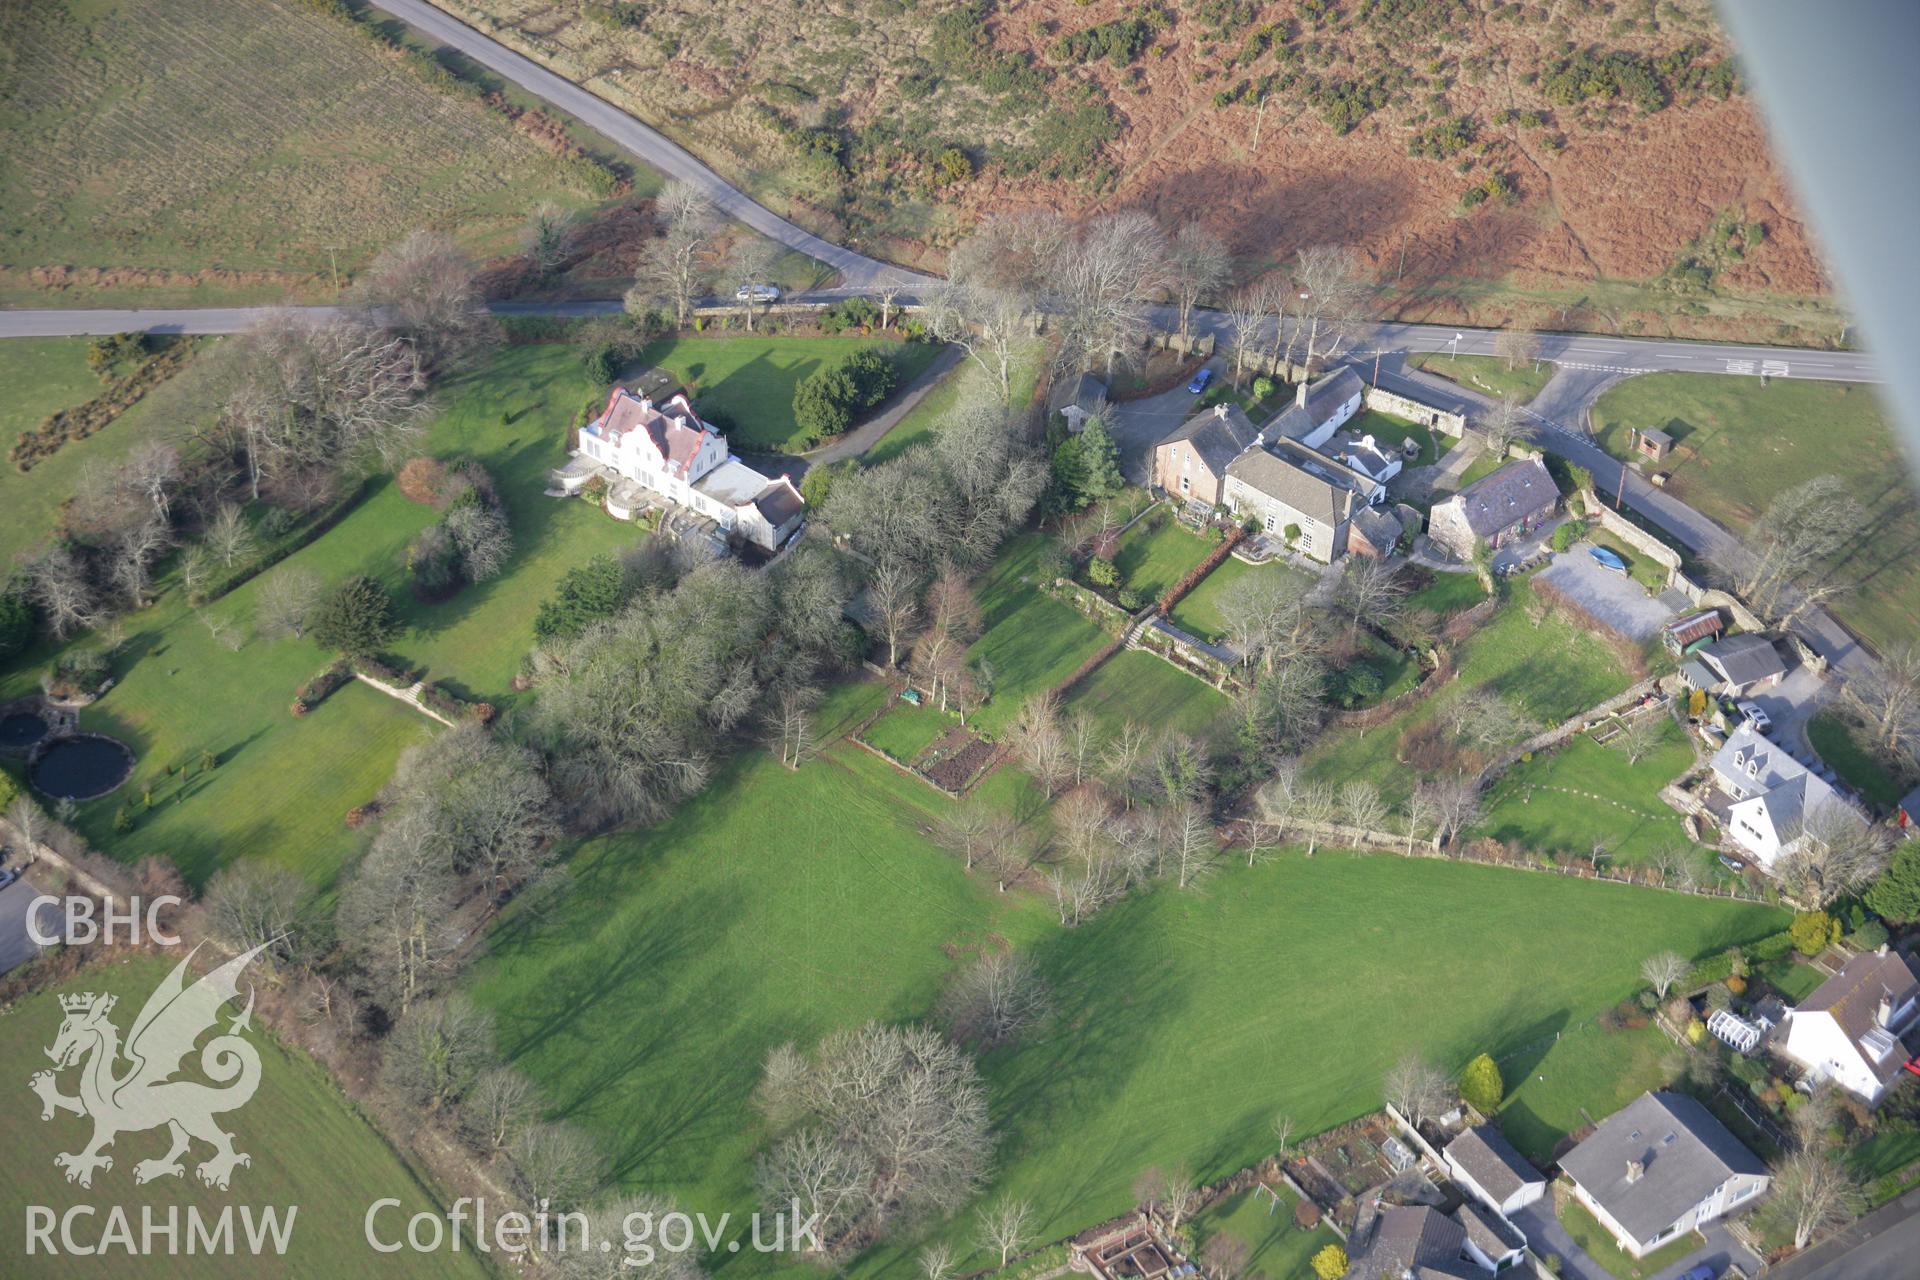 RCAHMW colour oblique aerial photograph of Reynoldston Camp from the south. Taken on 26 January 2006 by Toby Driver.